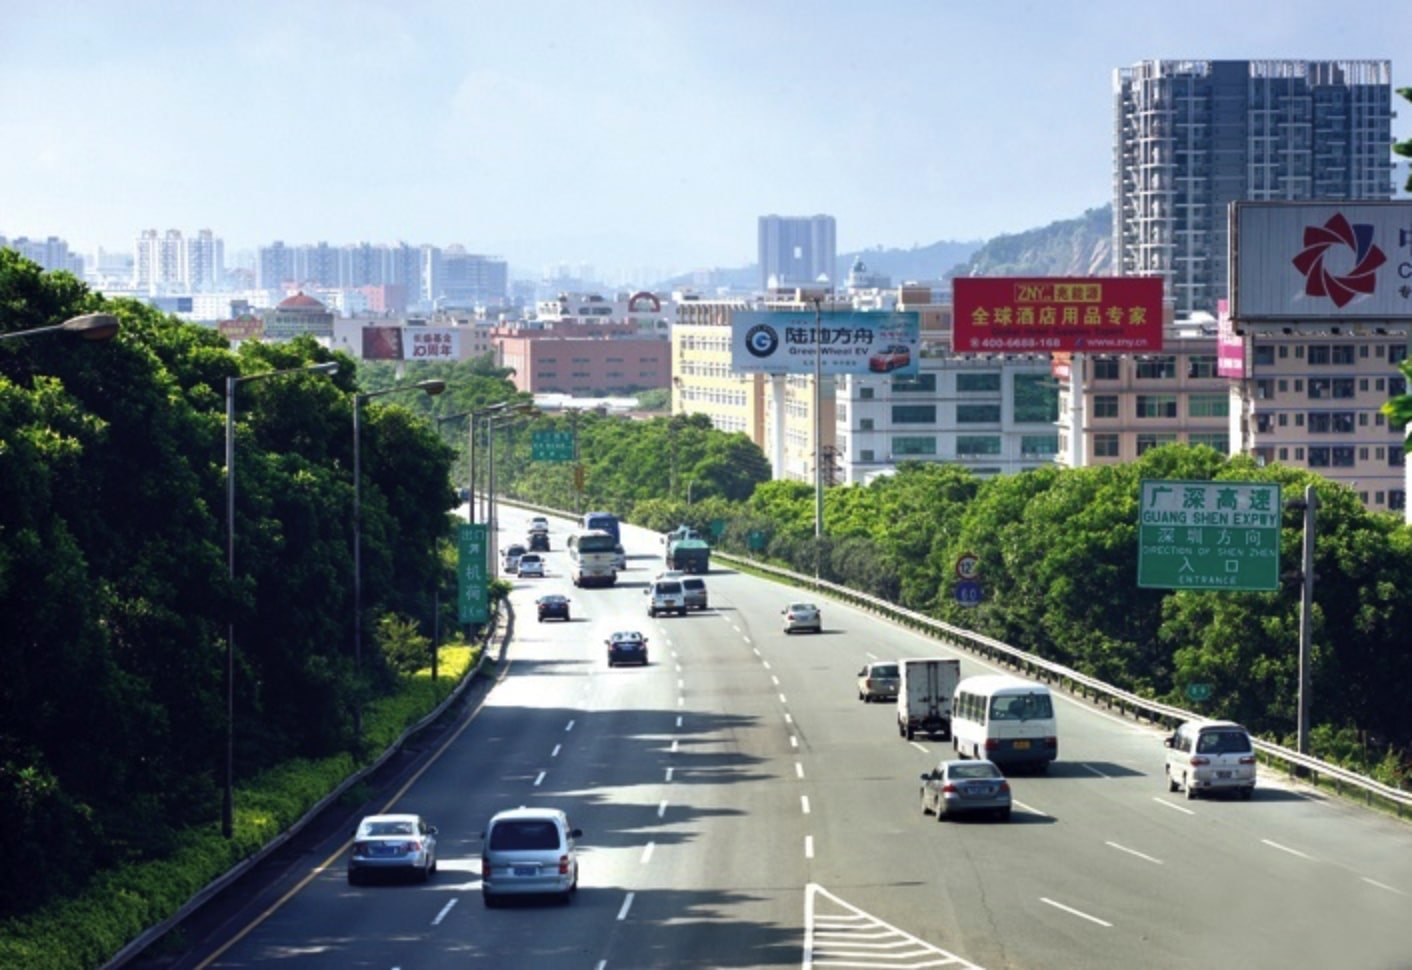 Guangshen Expressway connecting the cities of Guangzhou, Dongguan and Shenzhen opened in 1997, and was one of the first China PPPs © Hopewell Holdings Limited